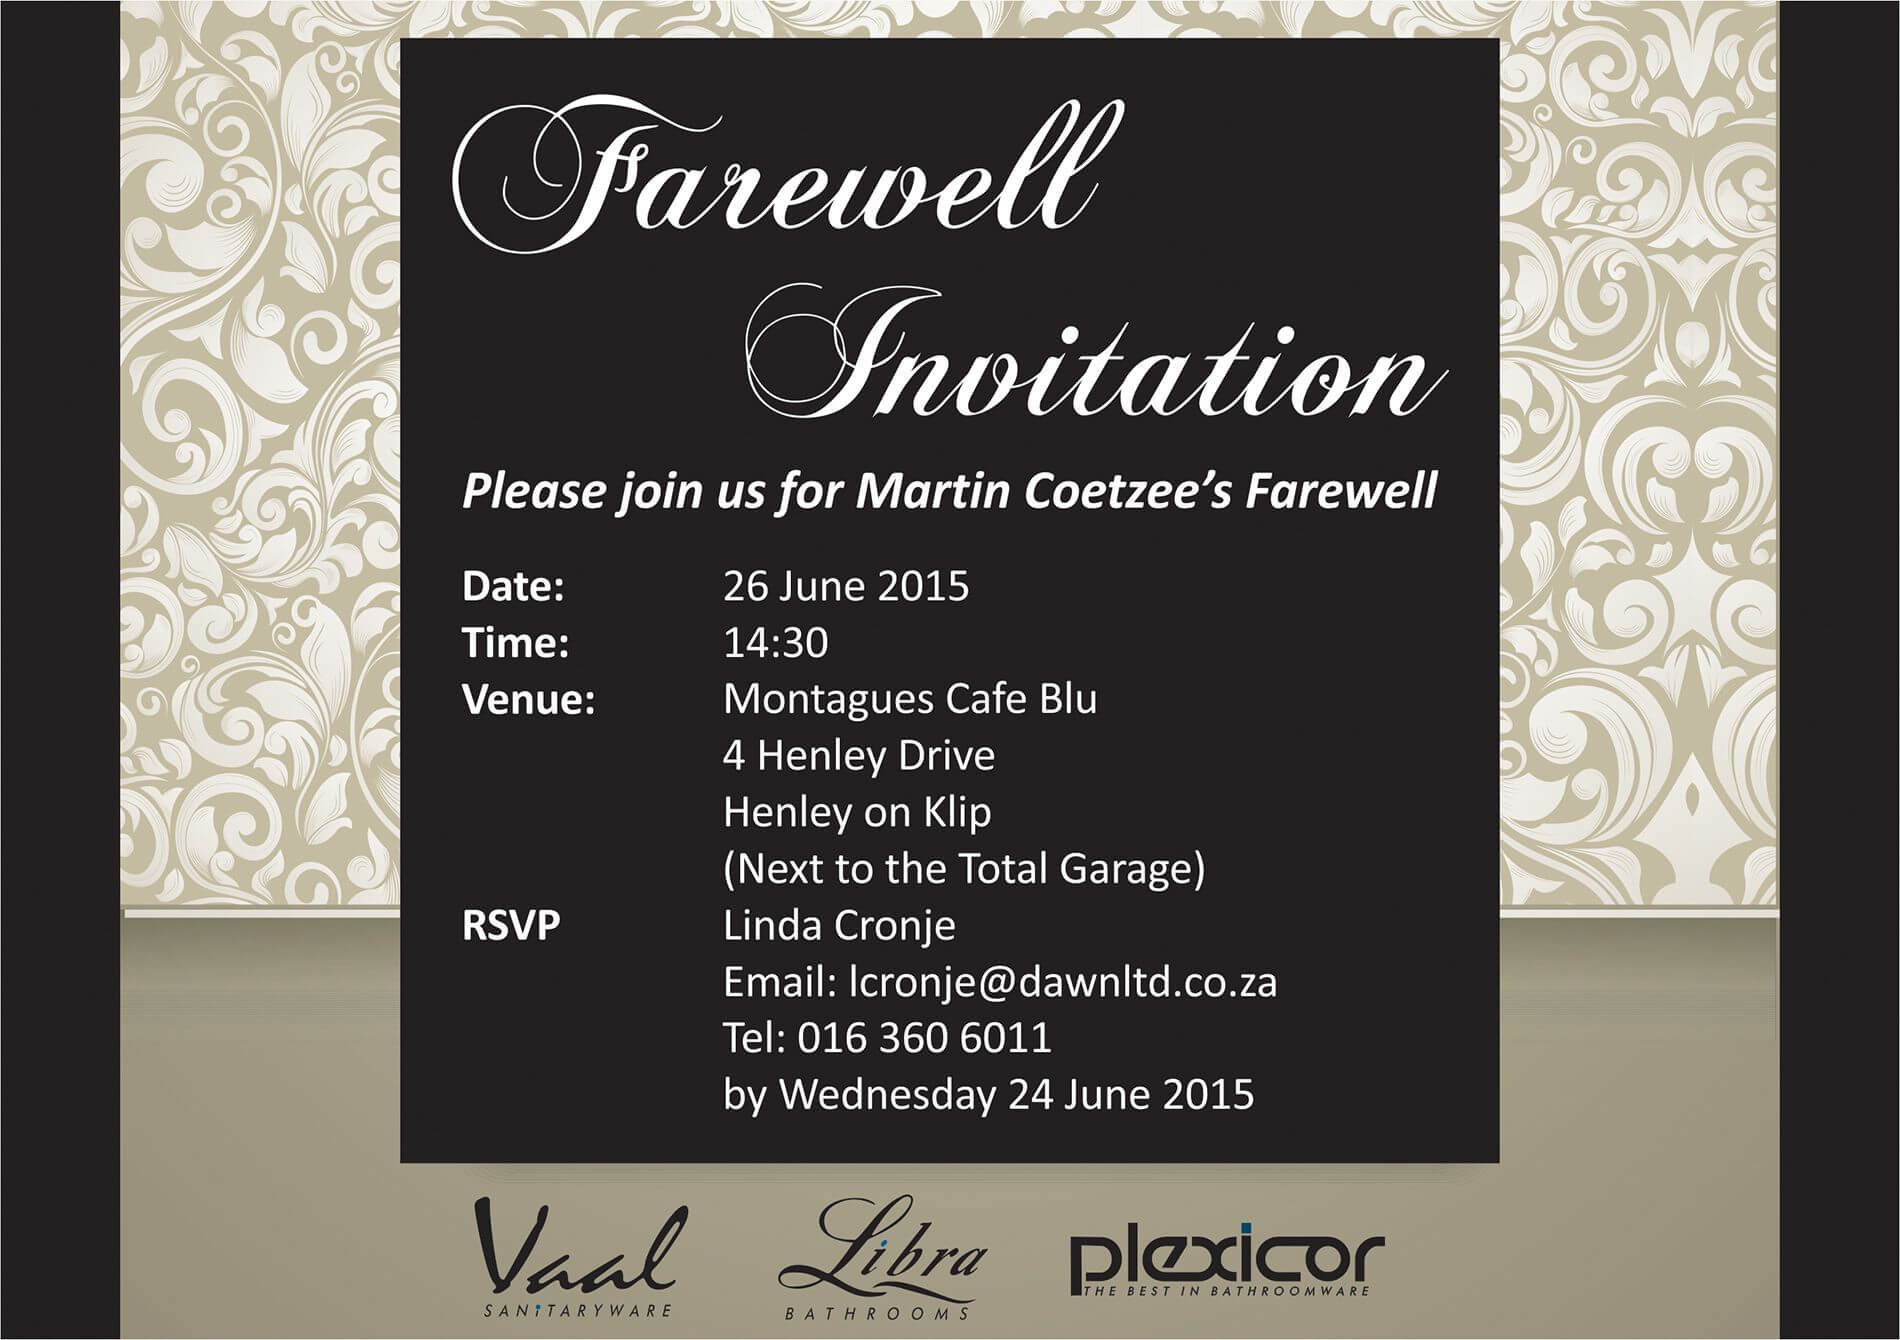 Event Invitation Card Template+Word | Free Invitation Cards With Regard To Farewell Card Template Word